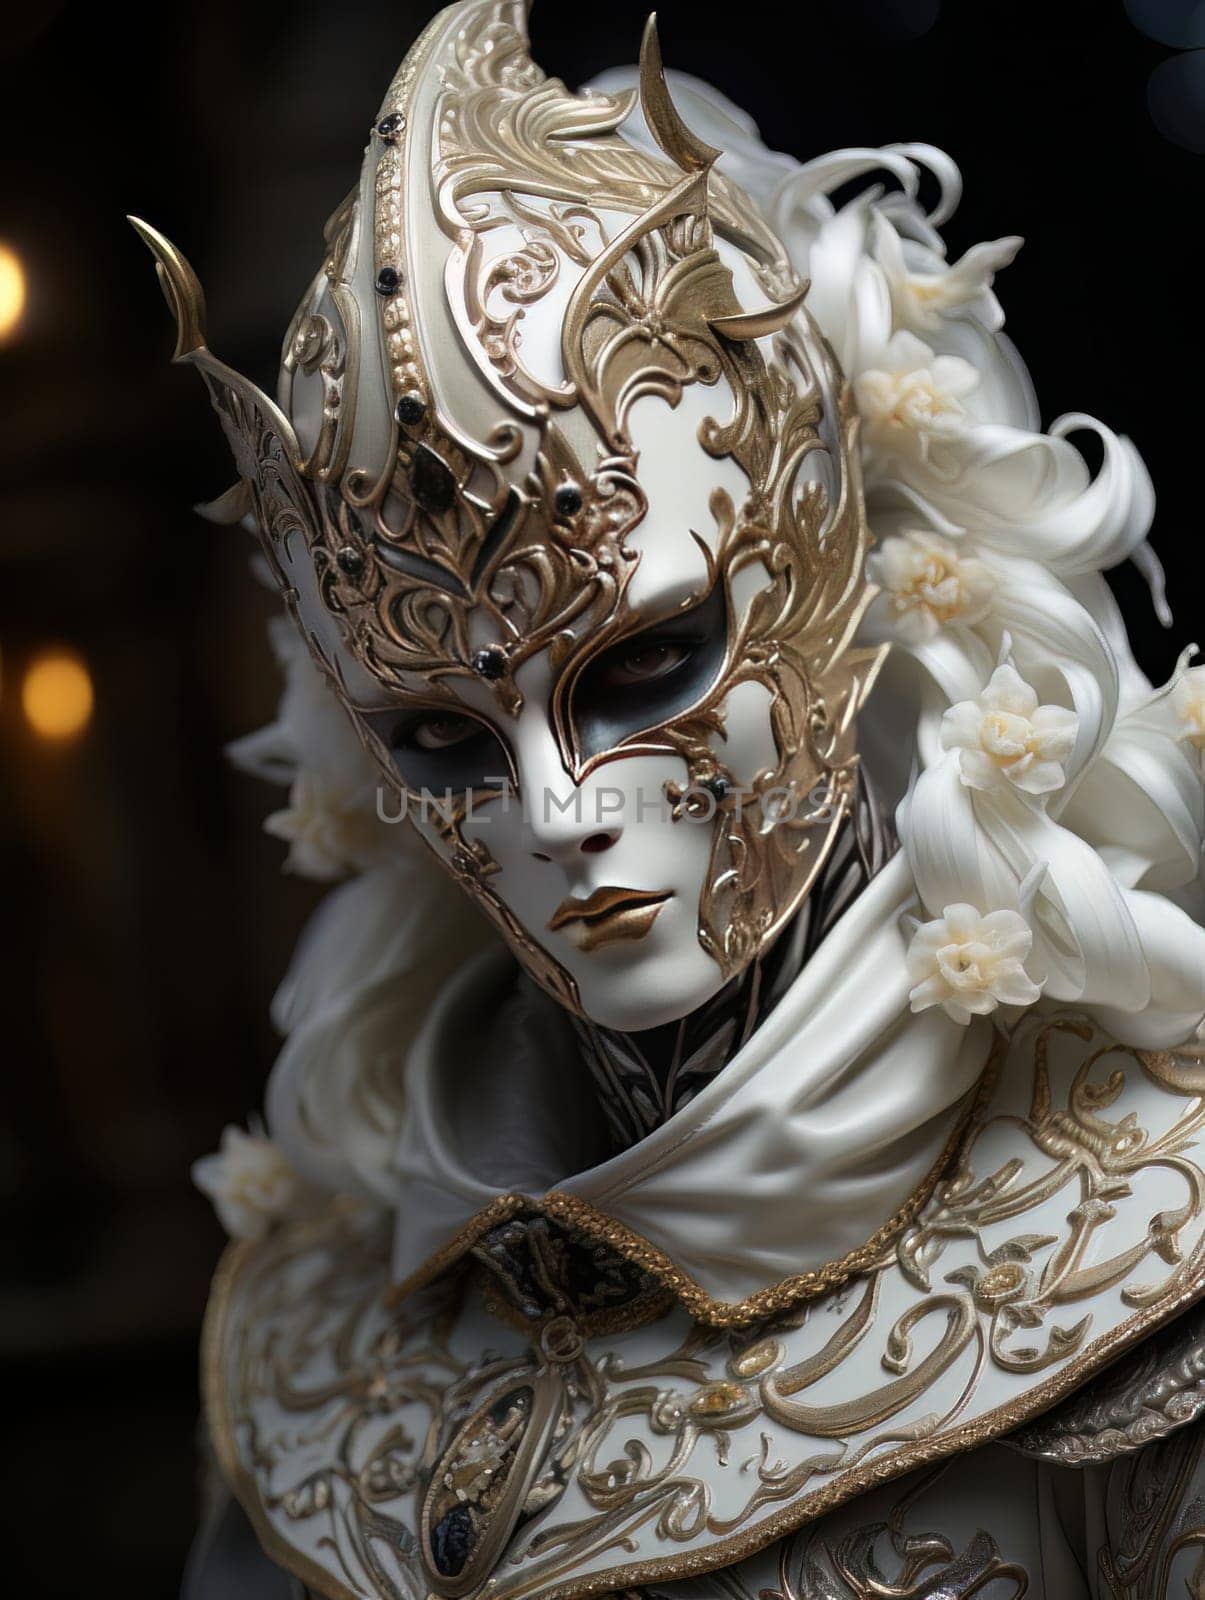 Female image of courtesan at festive carnival. Luxurious woman in white Venetian mask with gold patterns, AI